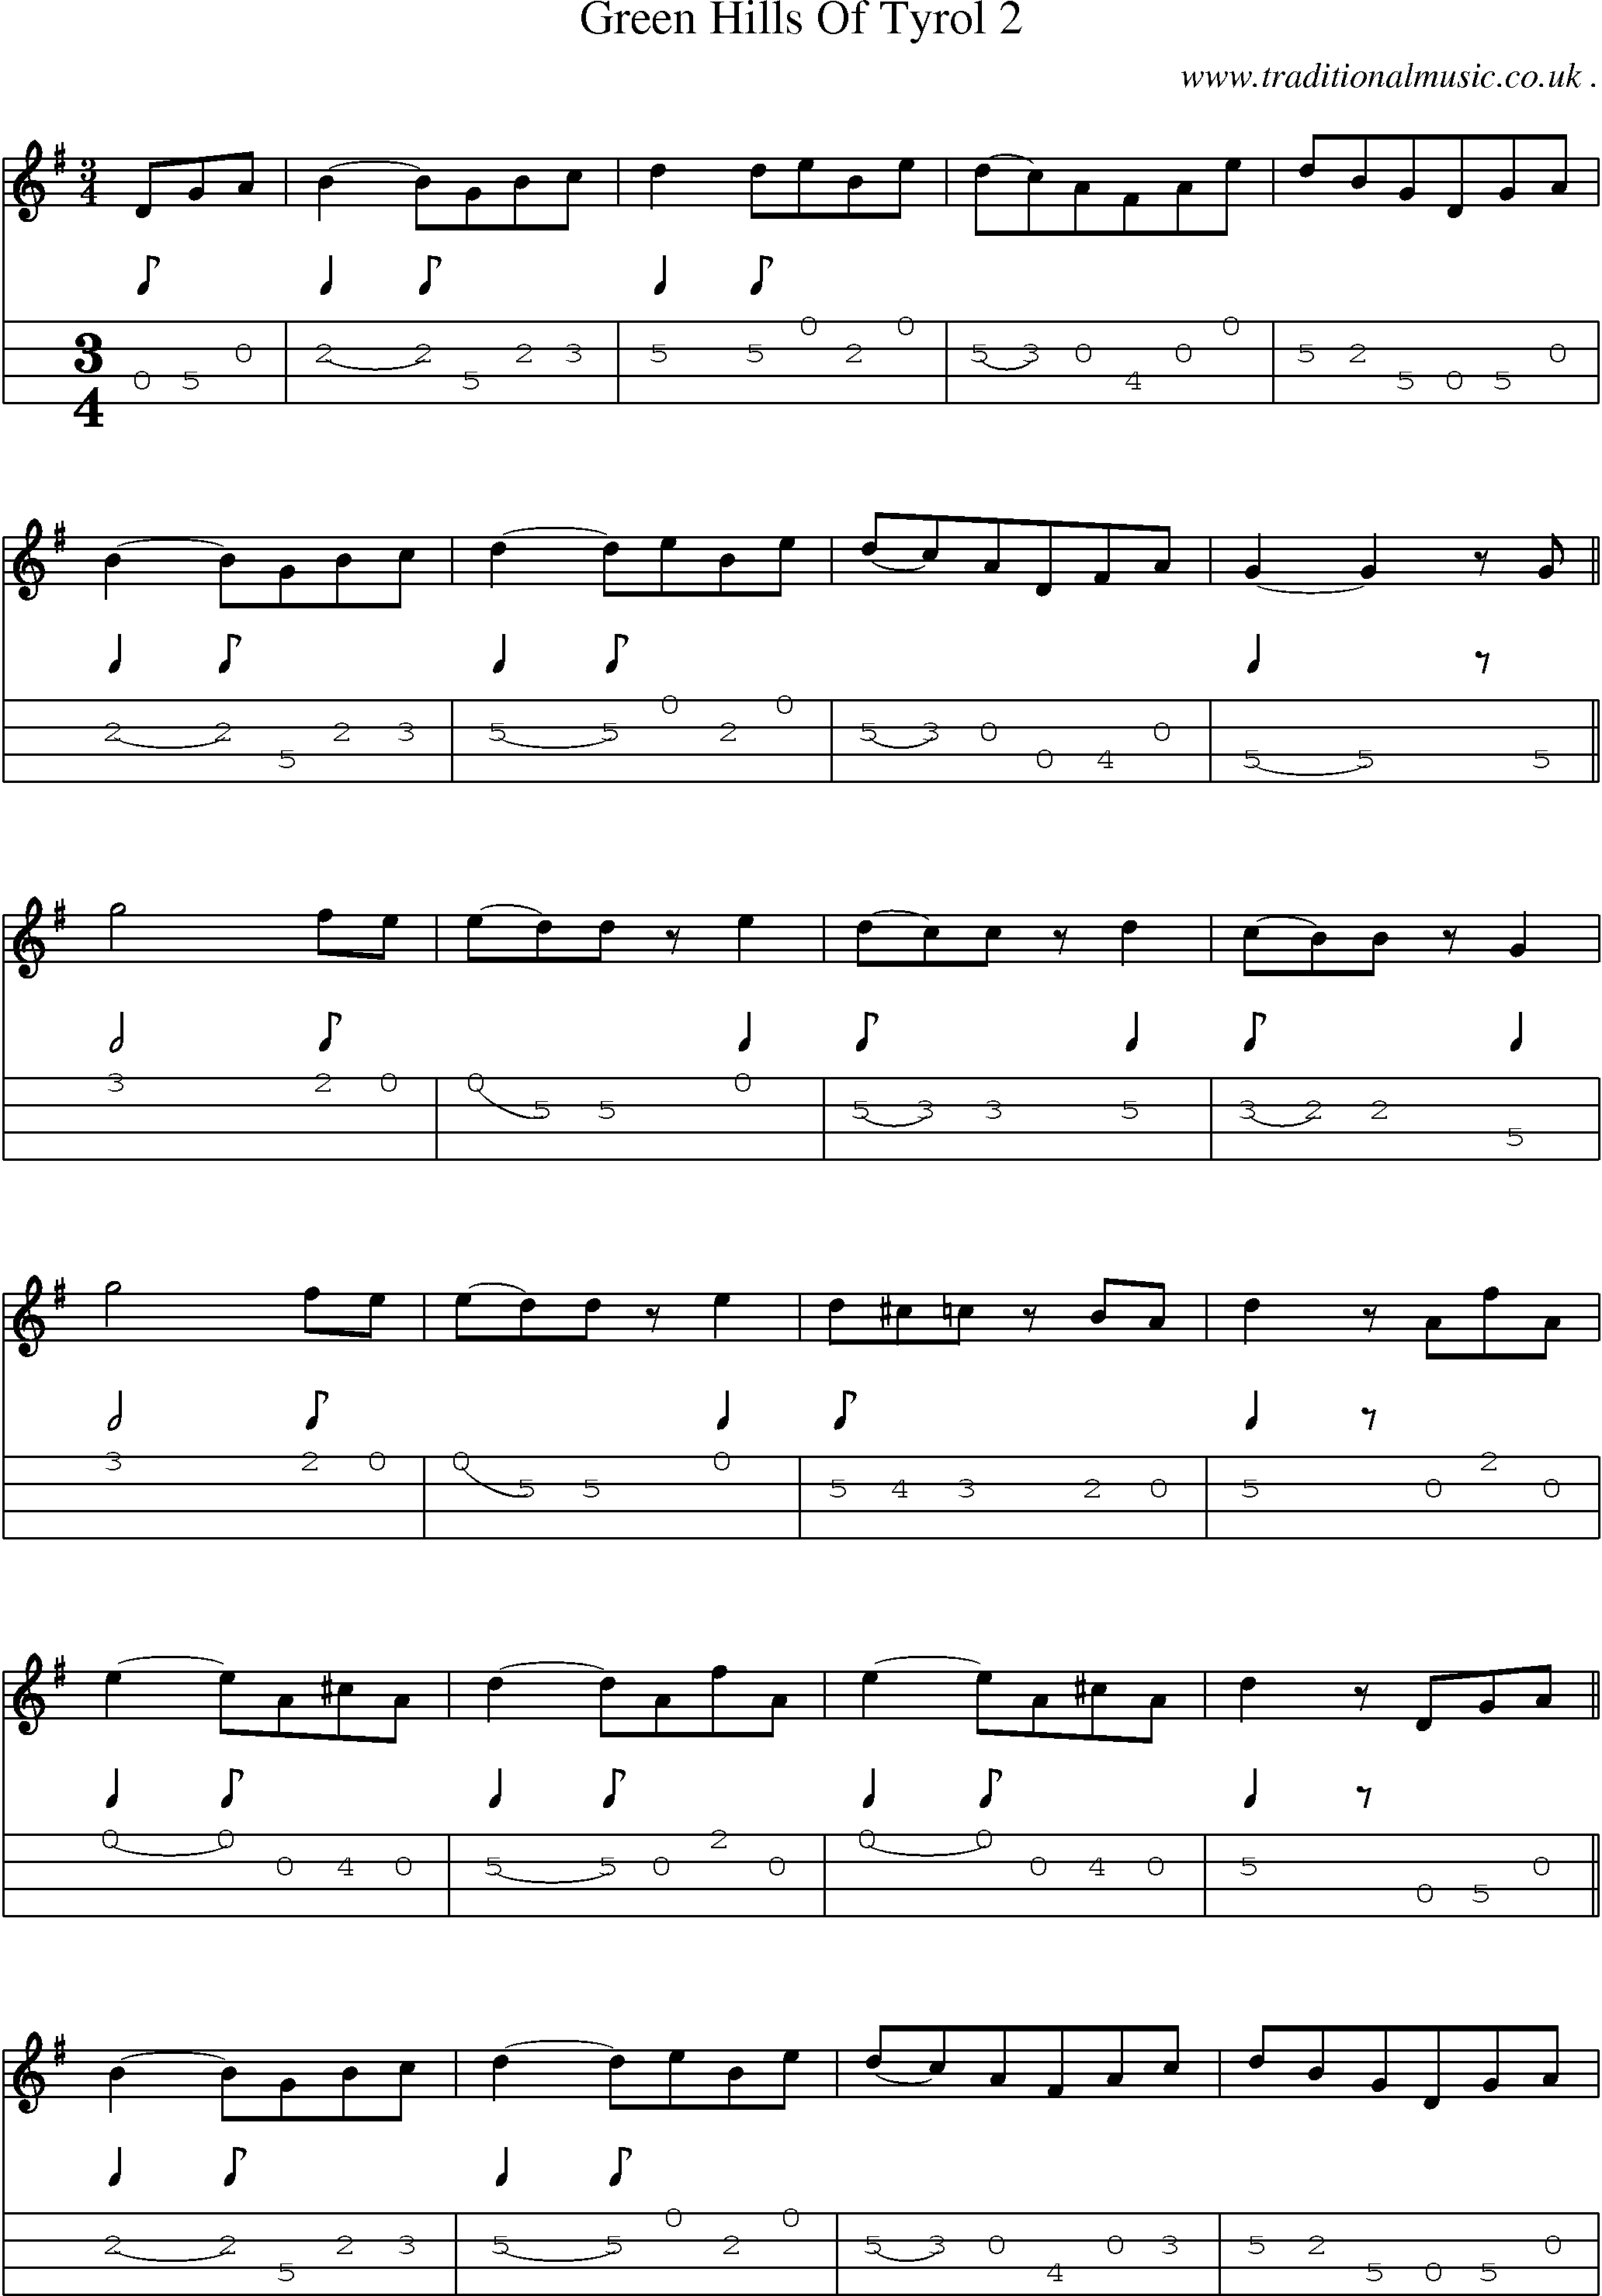 Sheet-Music and Mandolin Tabs for Green Hills Of Tyrol 2